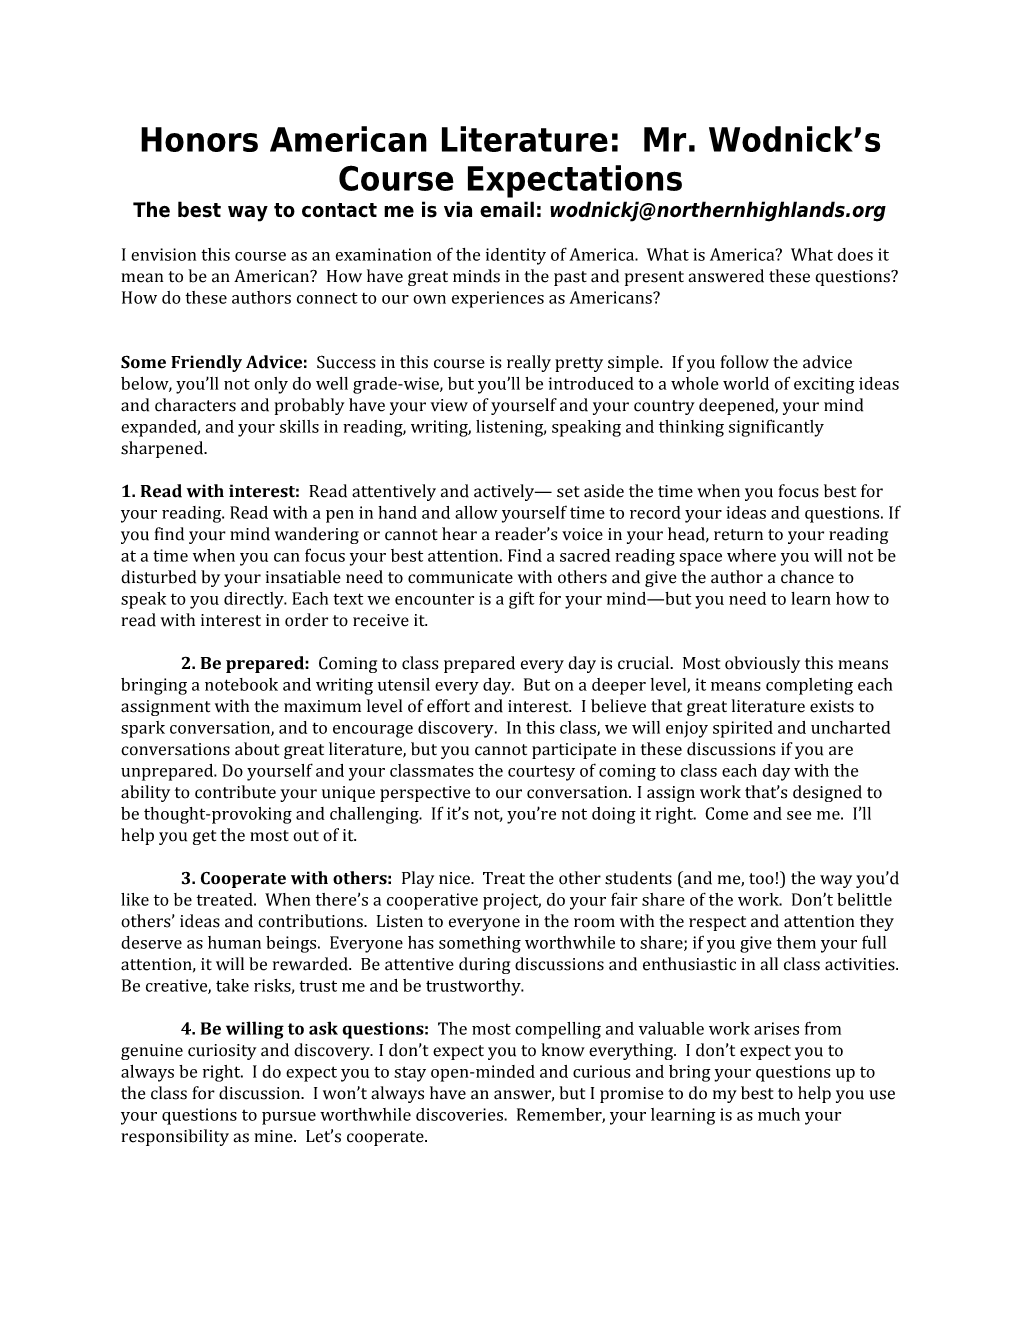 Honors American Literature: Course Expectations